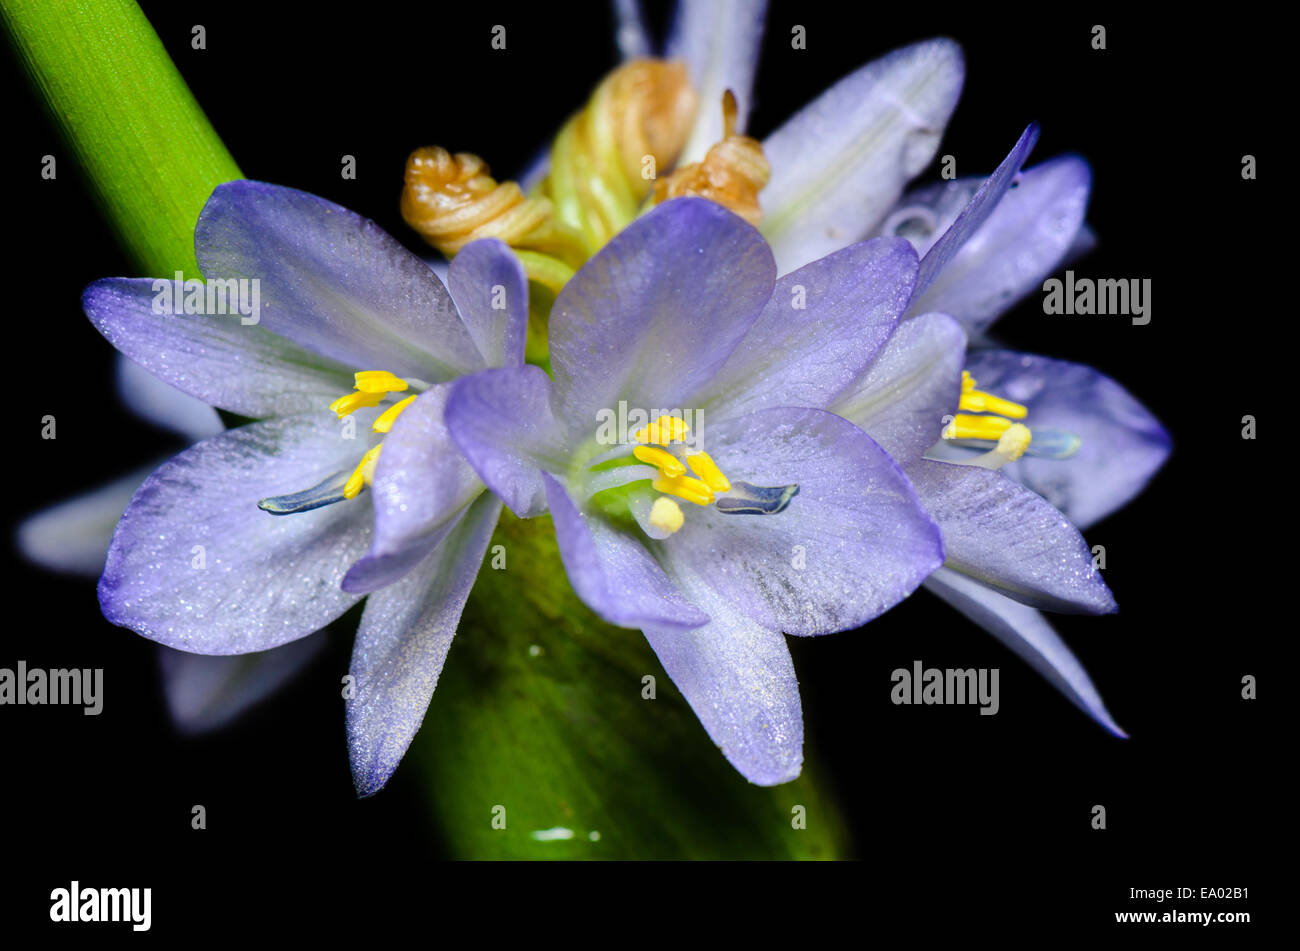 Close up purple flowers of Monochoria hastata (L.) Solms on black background, taken in Thailand Stock Photo